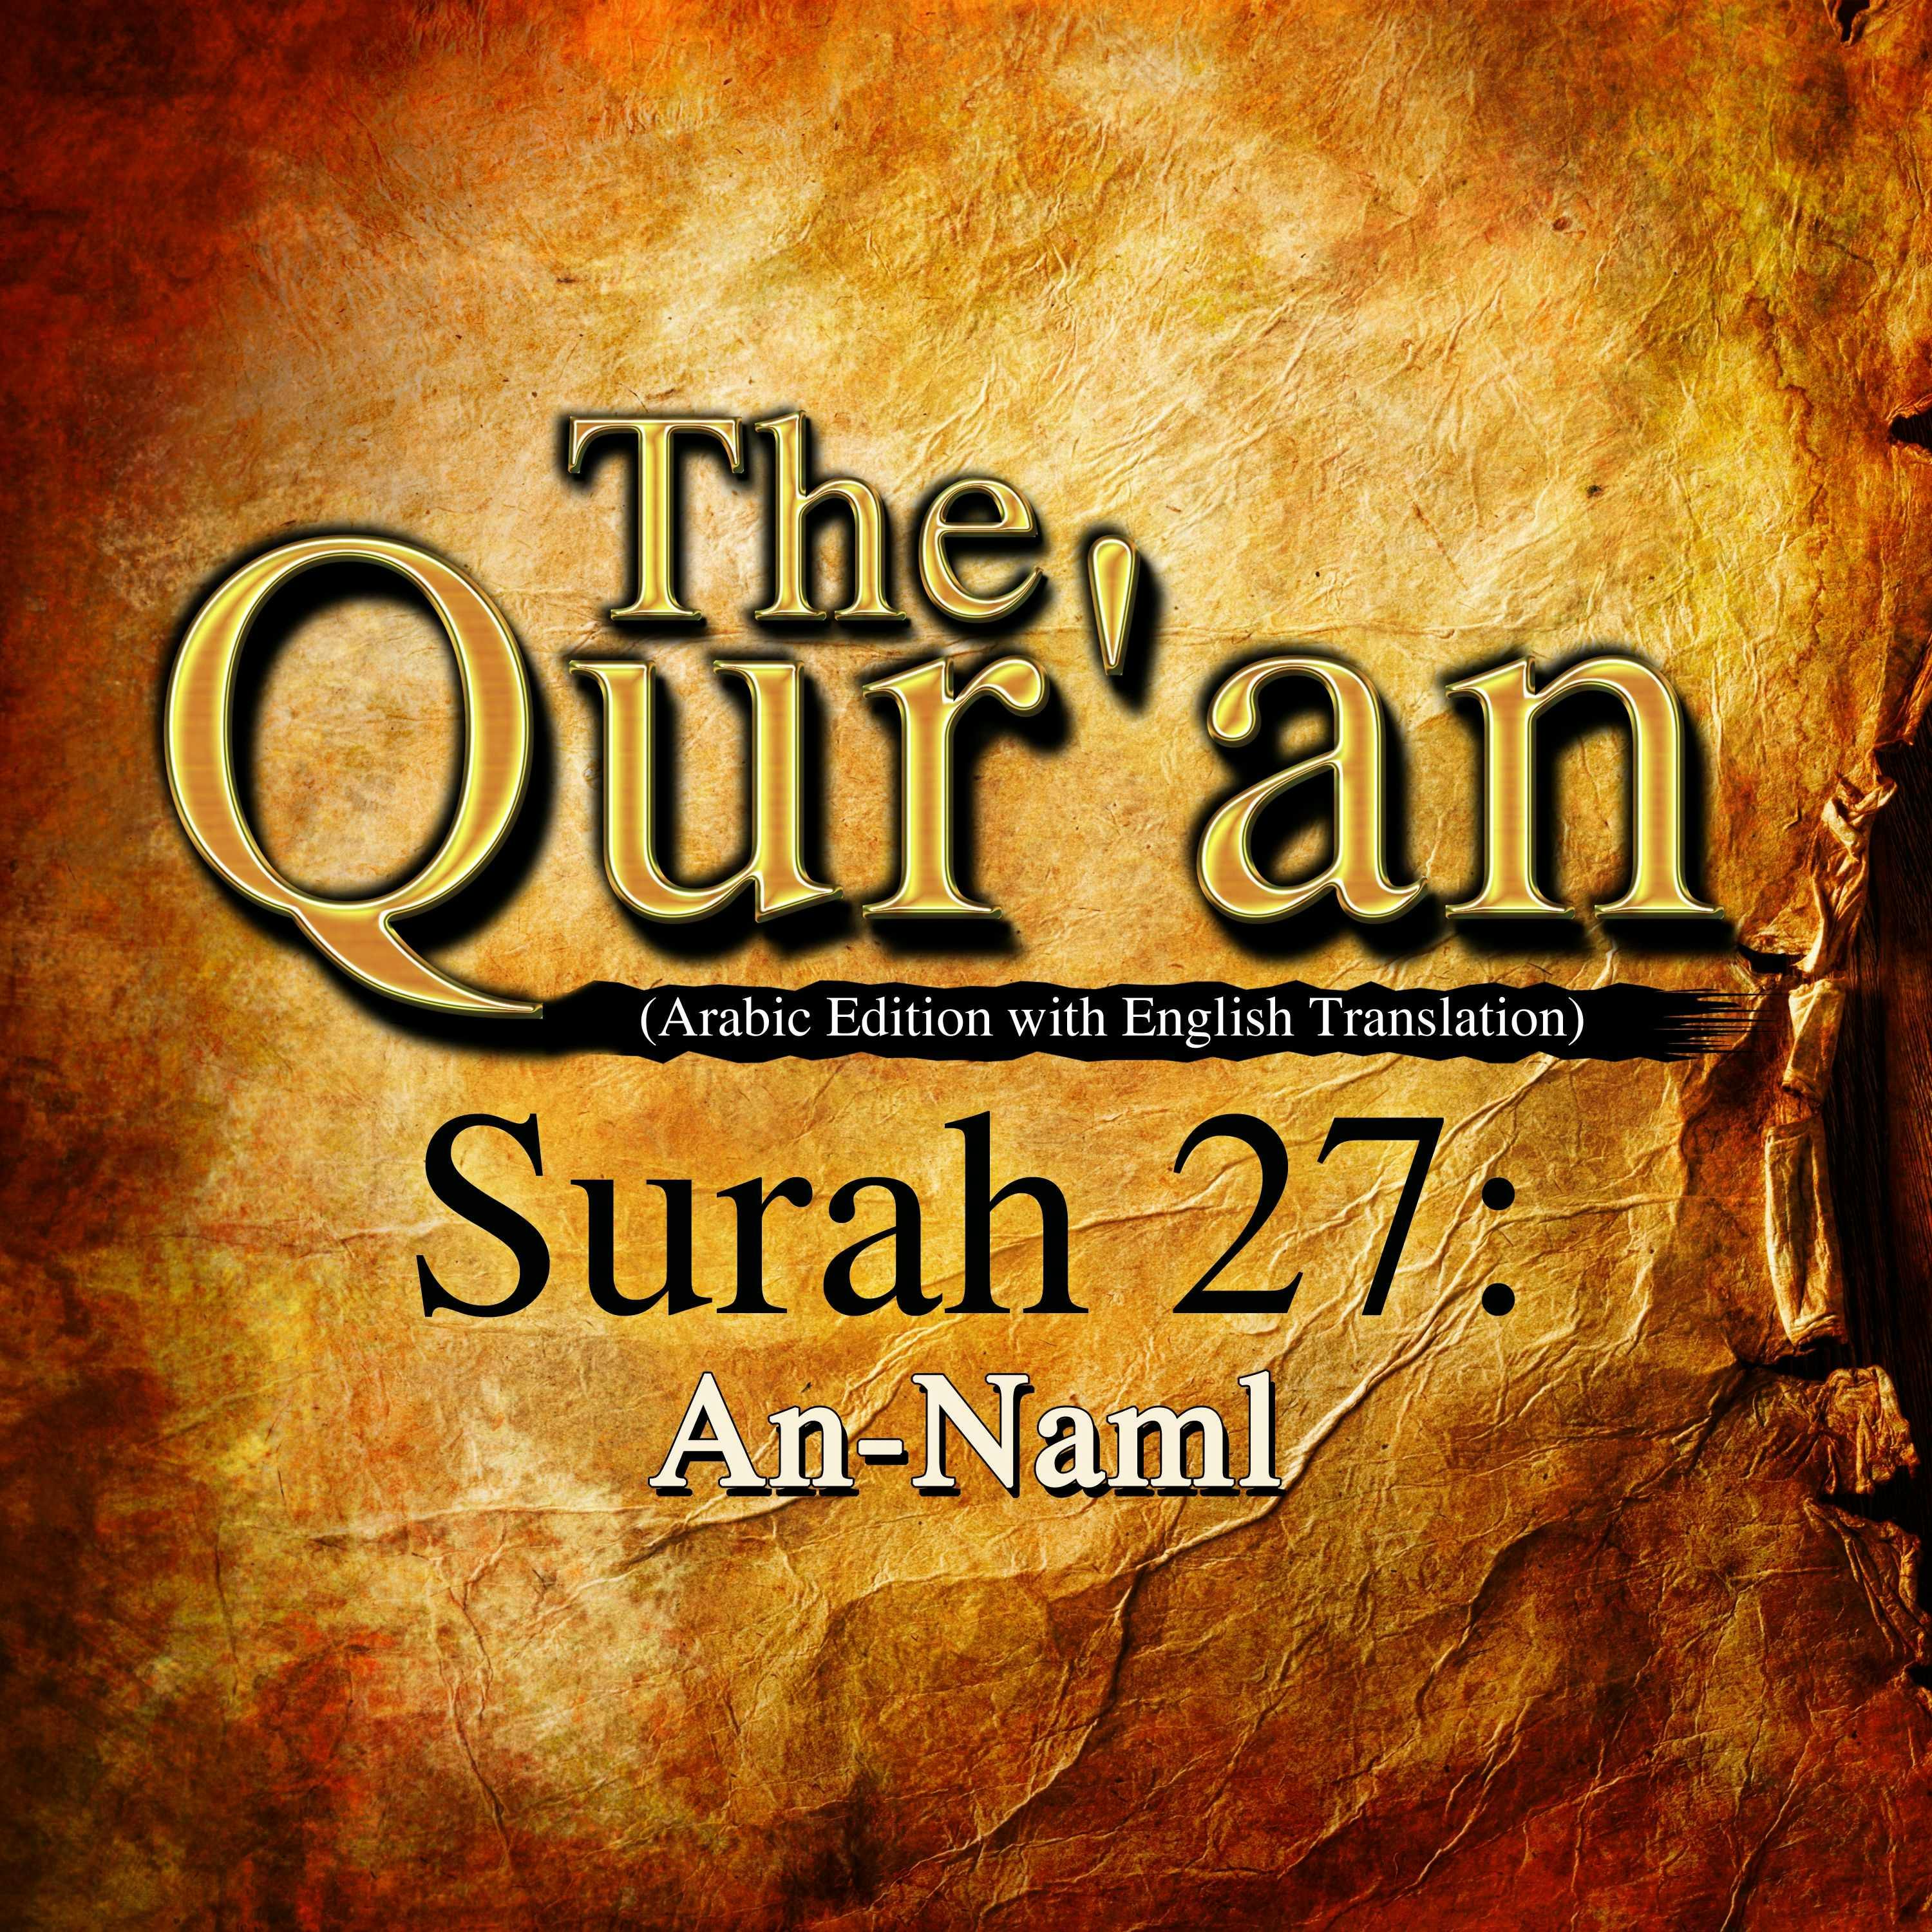 The Qur'an (Arabic Edition with English Translation) - Surah 27 - An-Naml - One Media The Qur'an